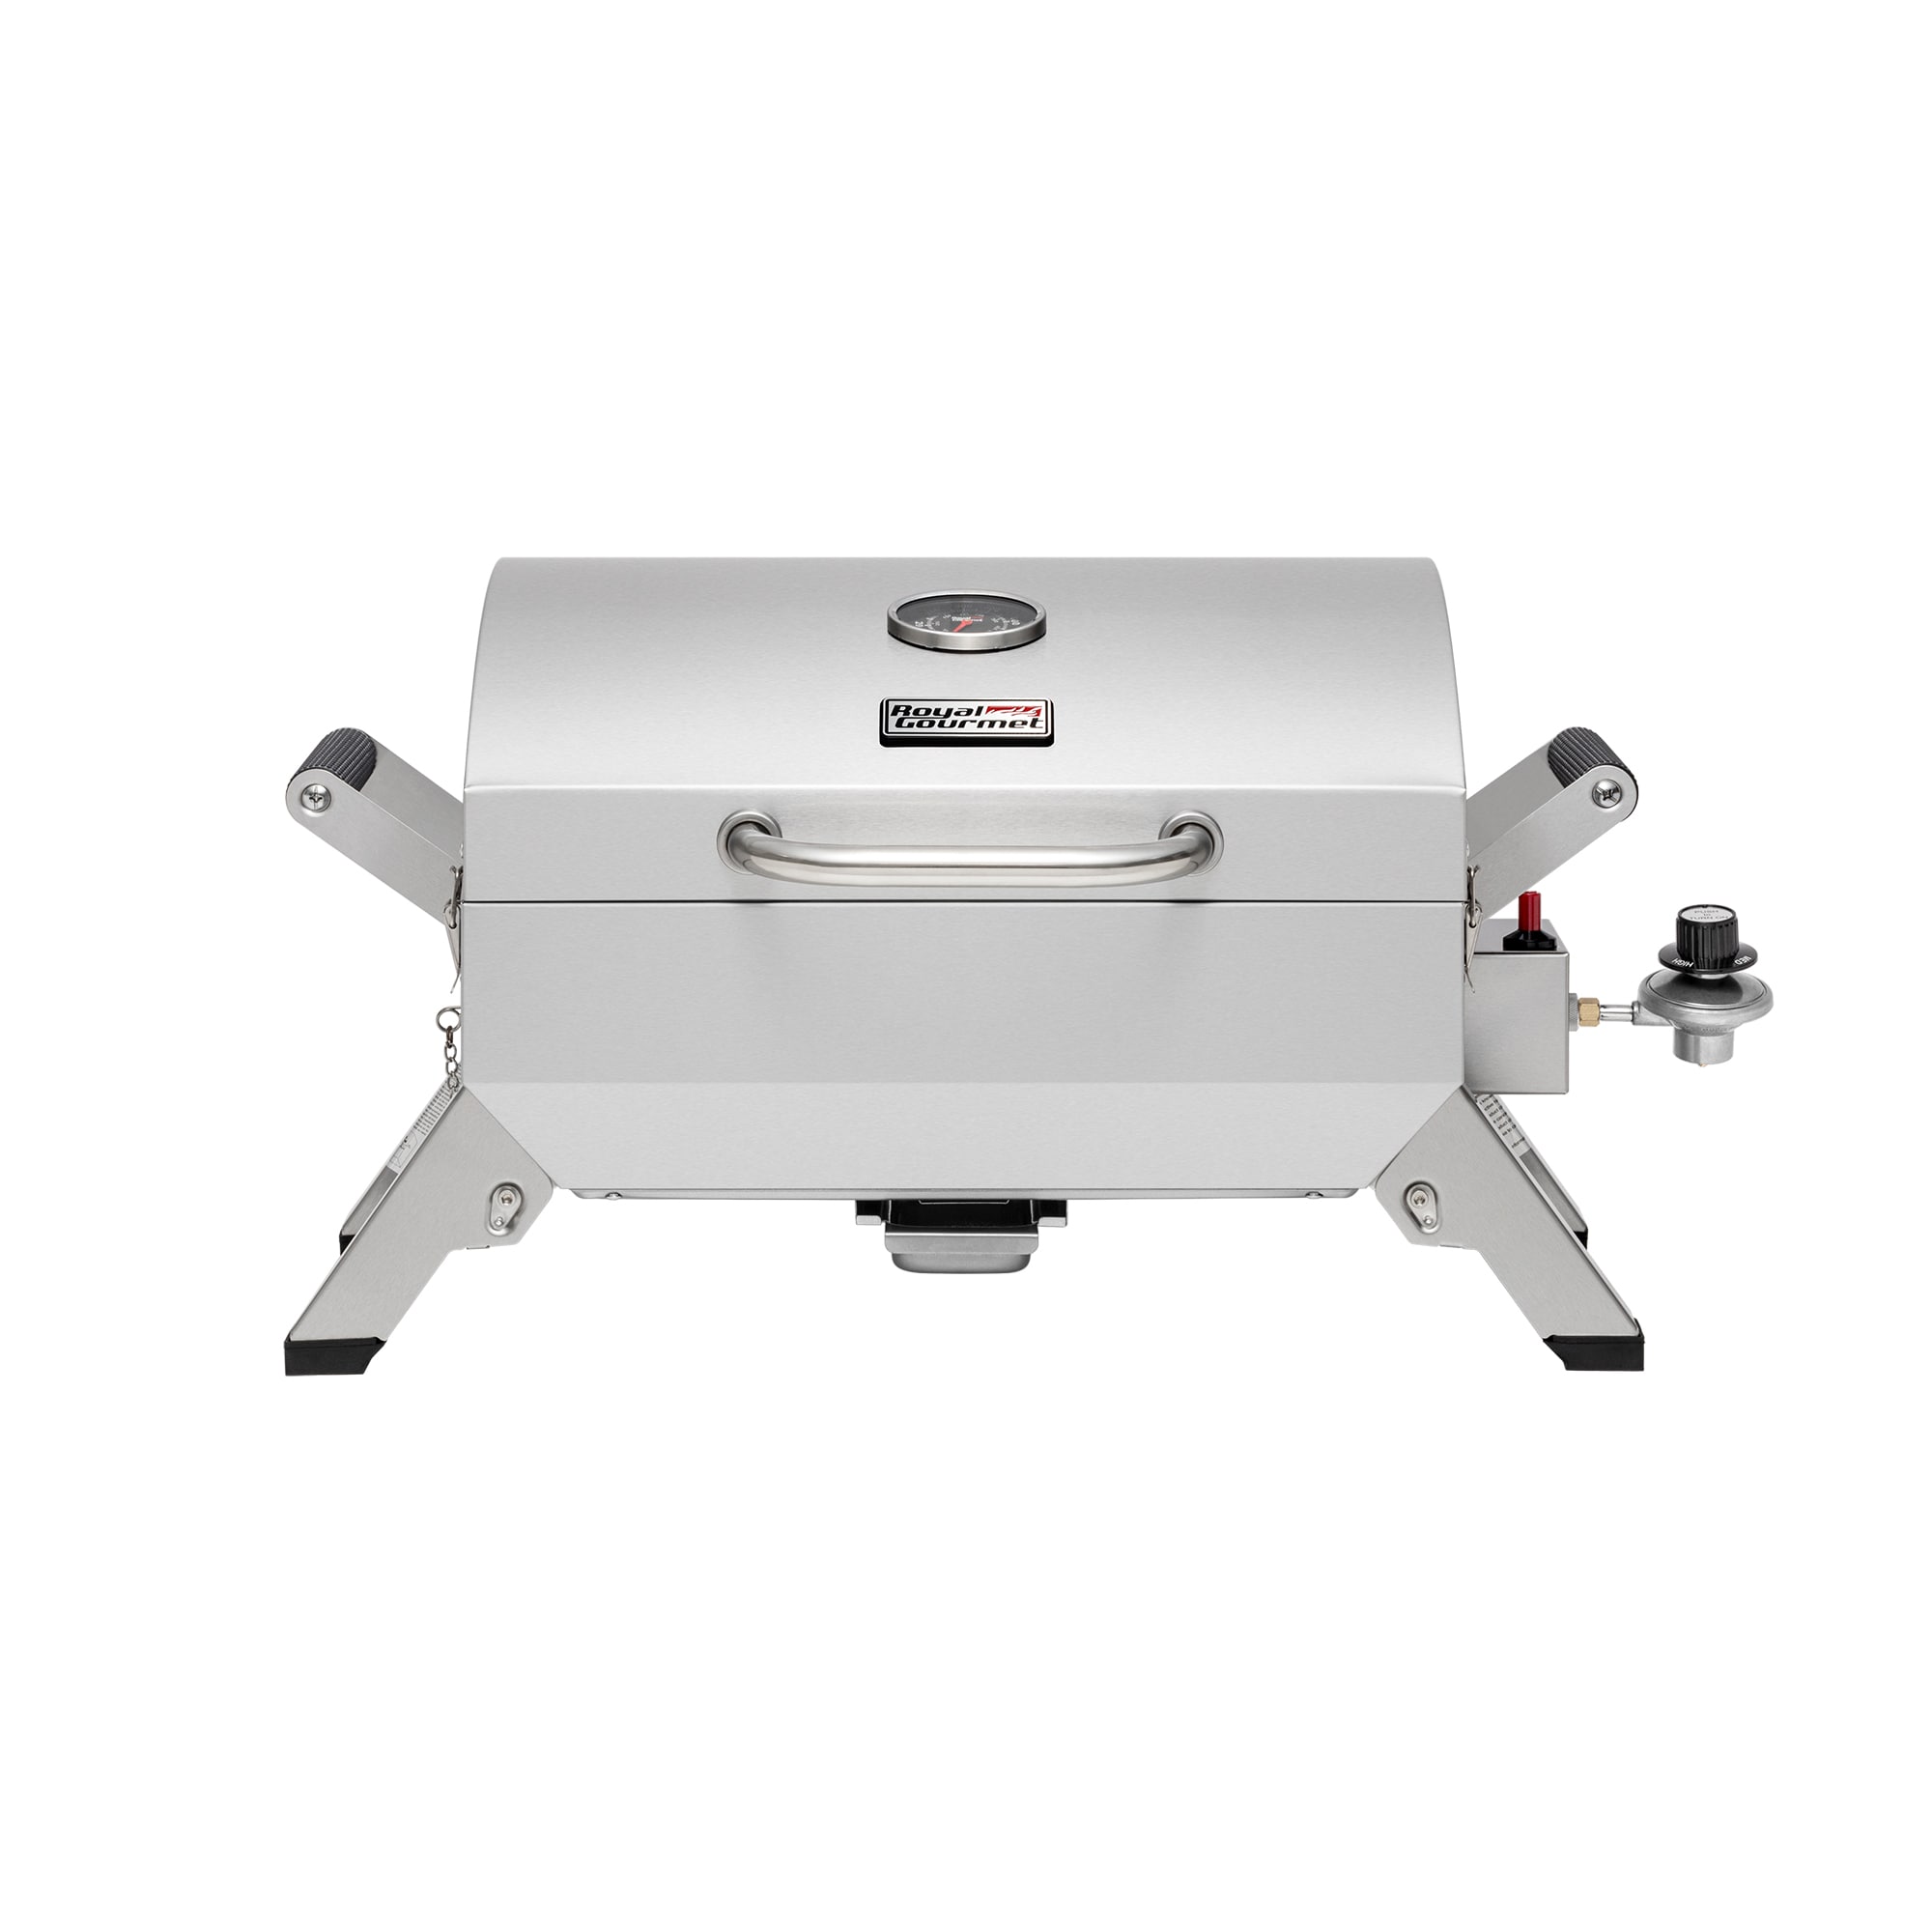 Cuisinart 3-in-1 Stainless 5 Burner Gas Grill Review